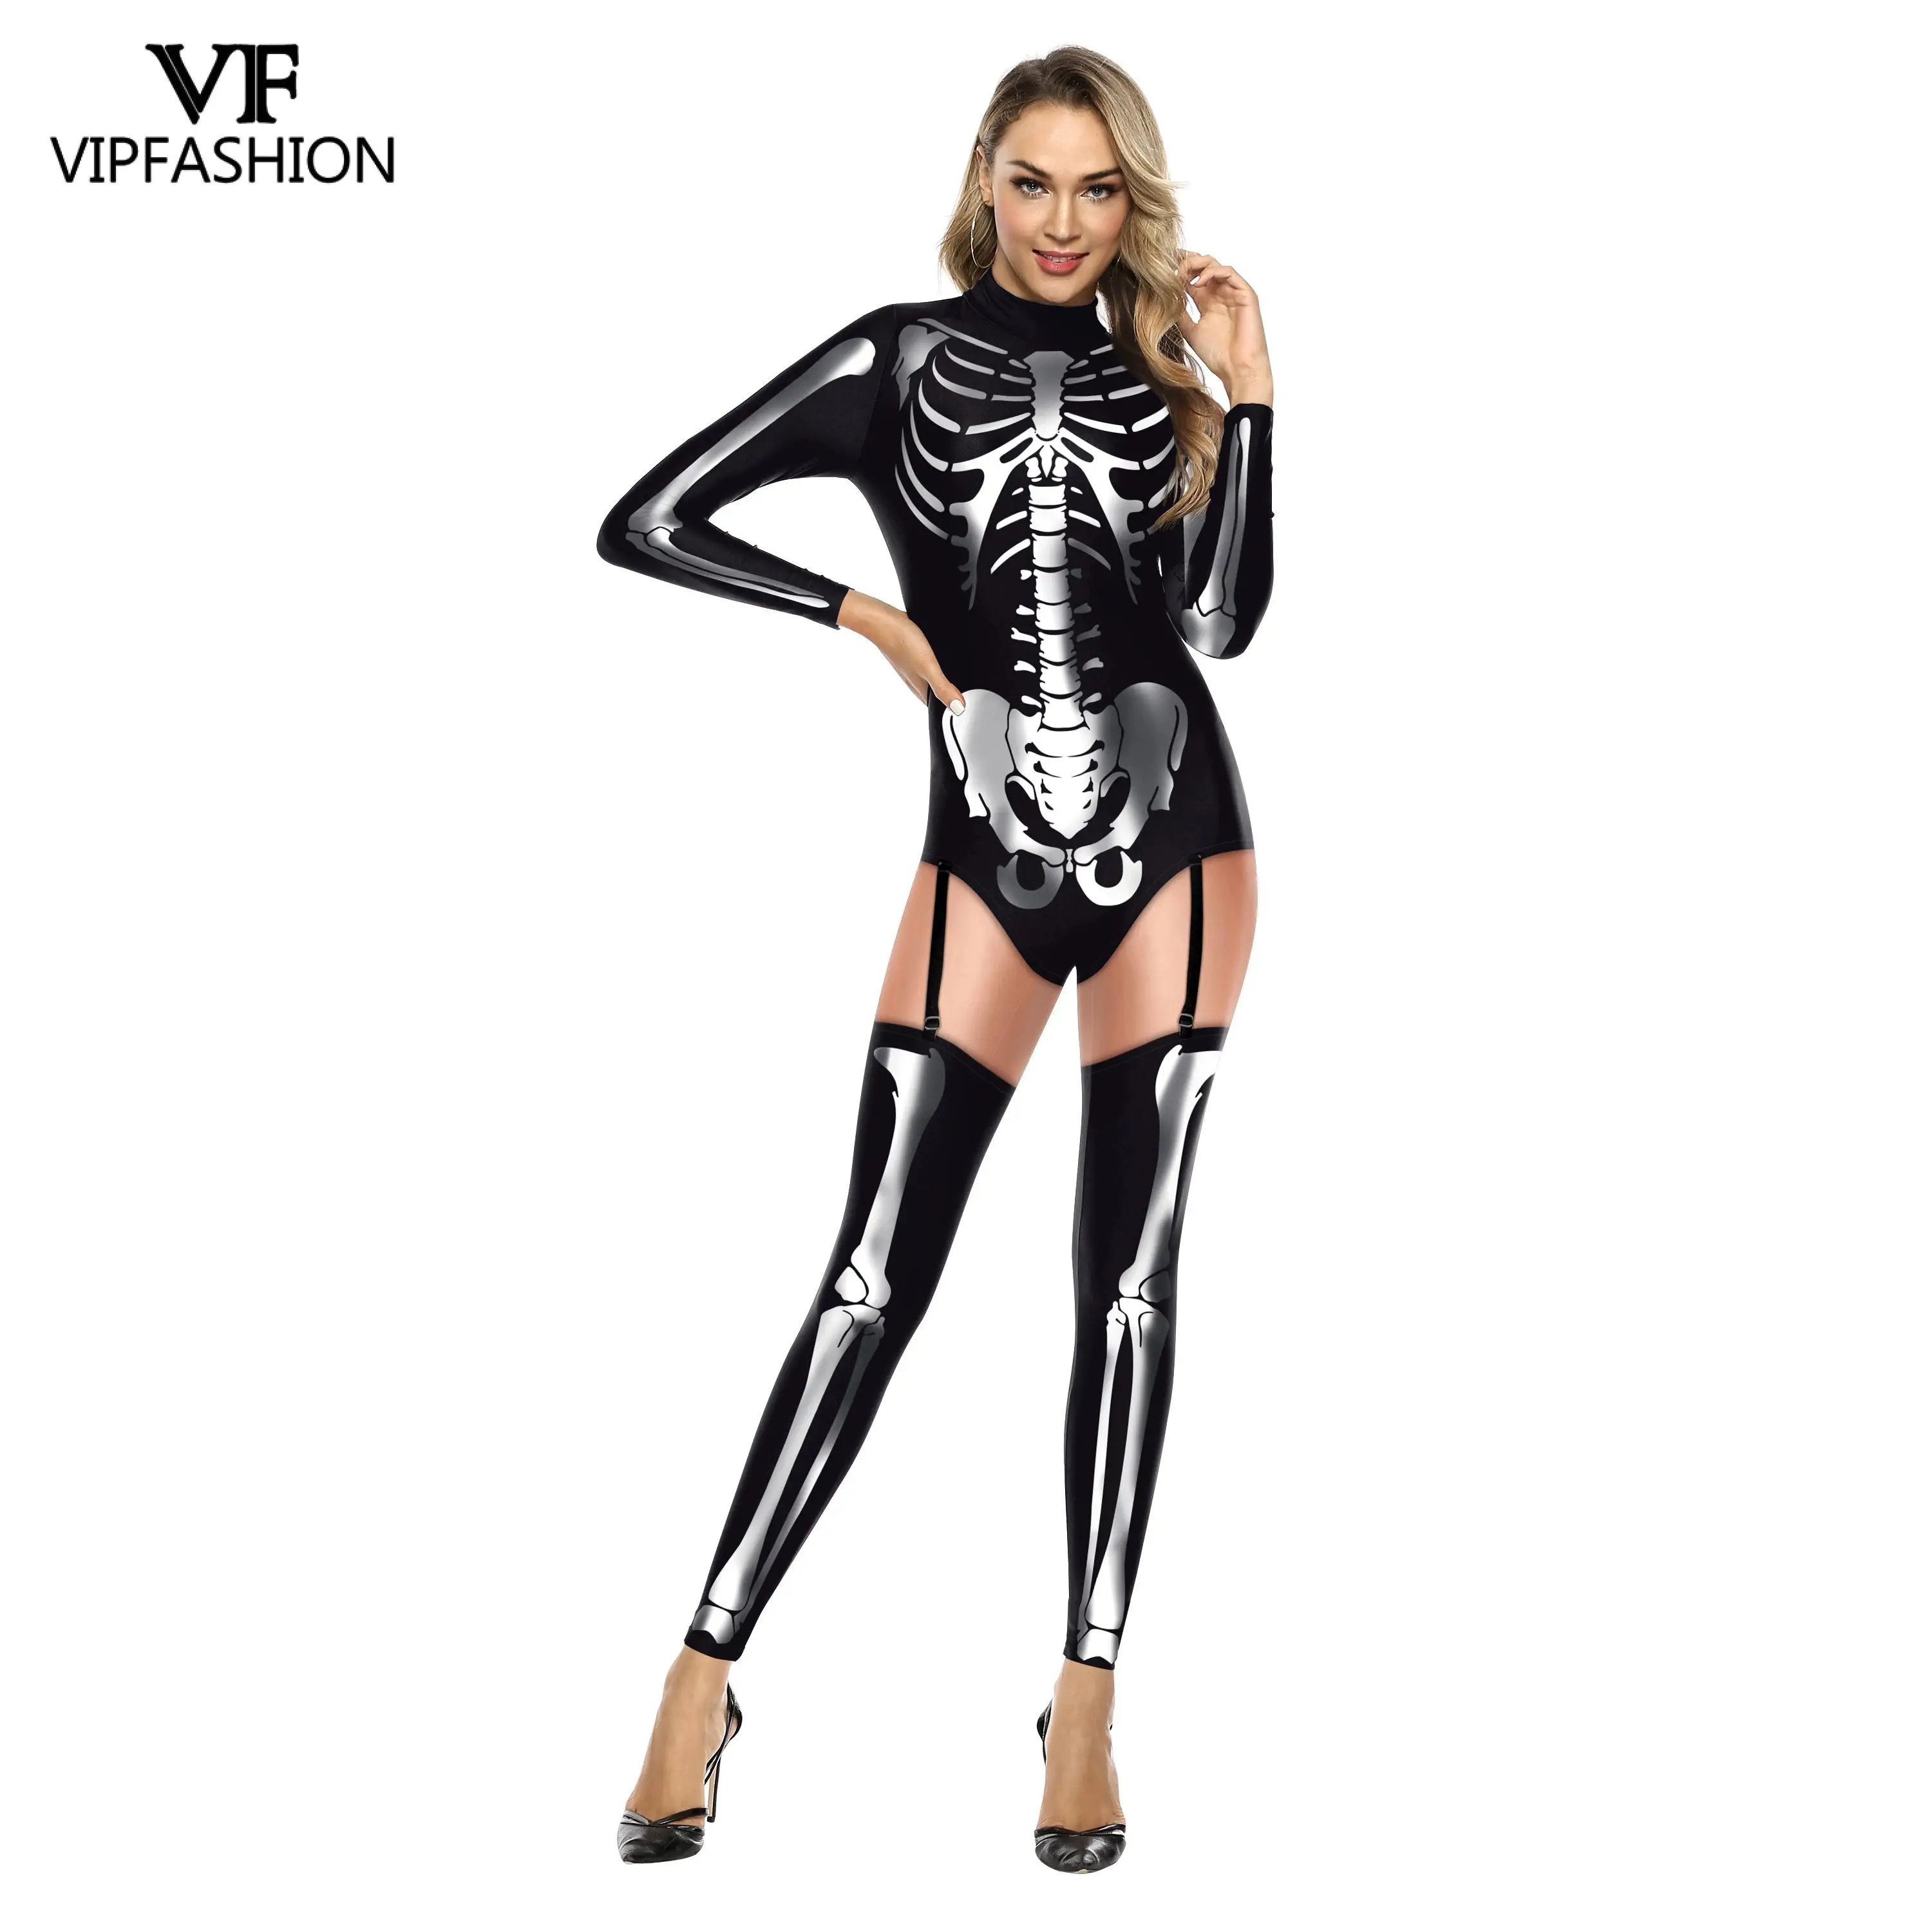 

VIP FASHION Cosplay Skeleton Printed Jumpsuit Carnival Party Clothes Onesies Outfits Romper Bodysuit Halloween Costume For Women